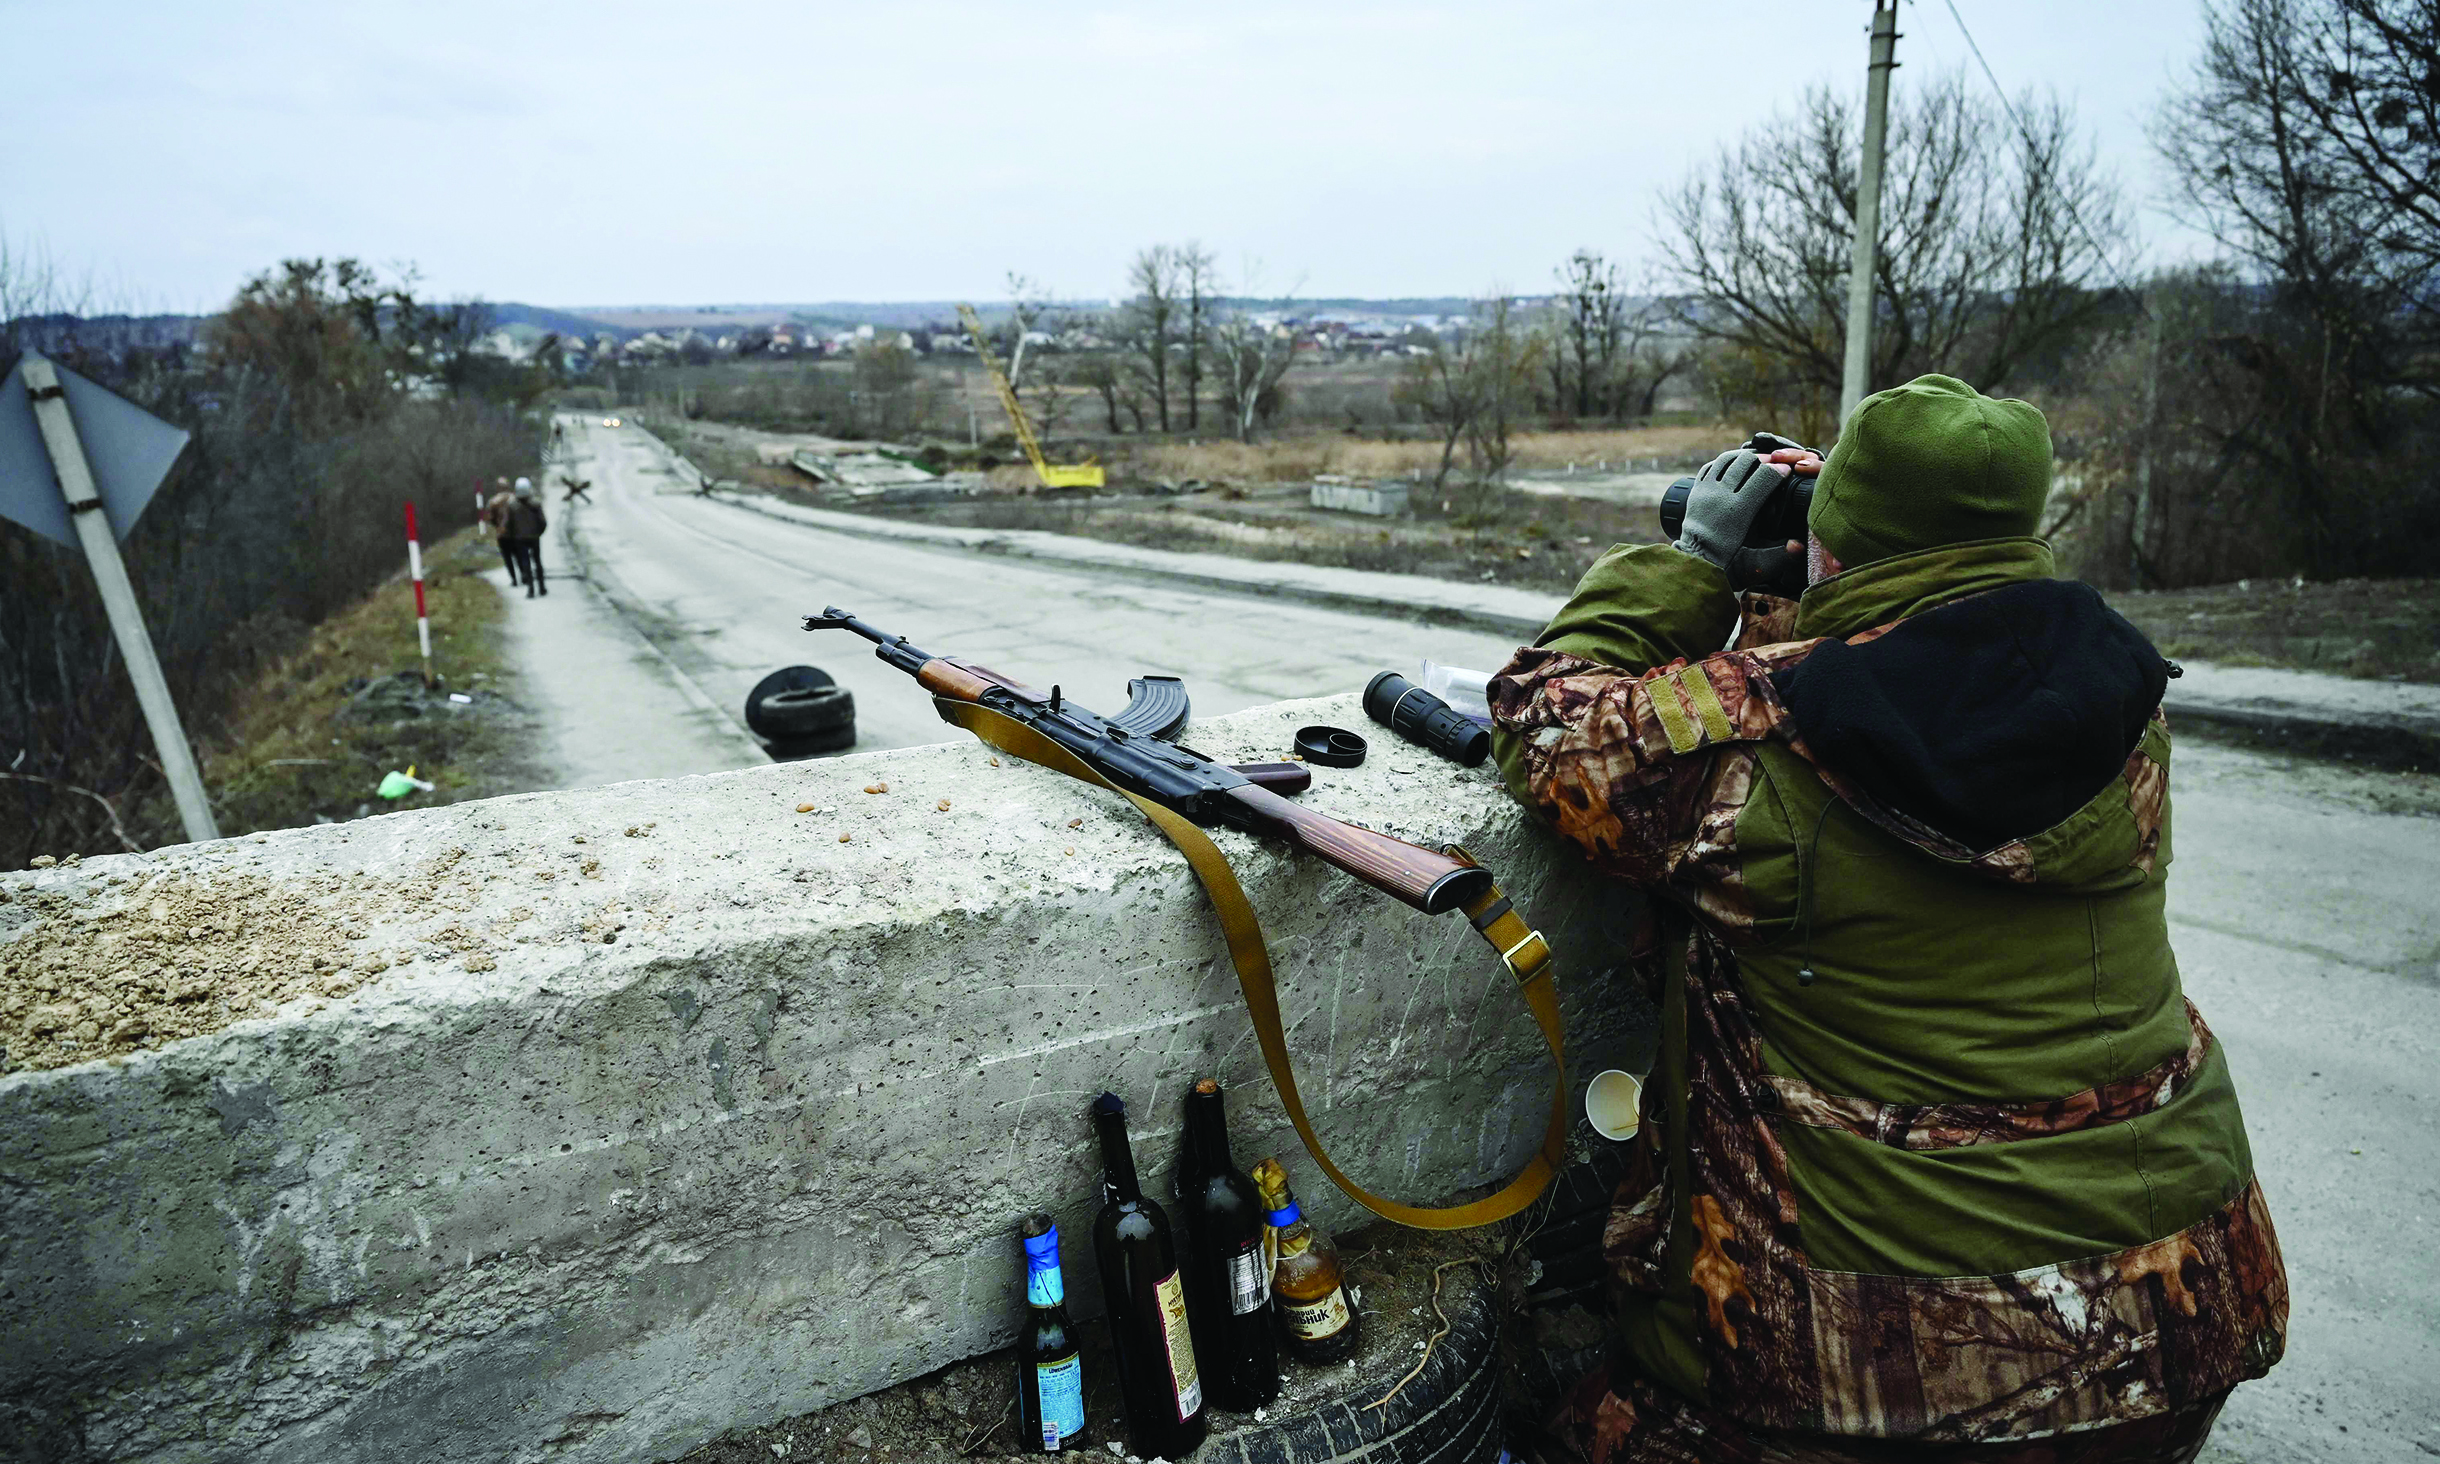 STOYANKA, Ukraine: A Ukrainian serviceman looks through binoculars towards the town of Stoyanka yesterday at a checkpoint before the last bridge on the road that connects Stoyanka with Kyiv. - AFP n